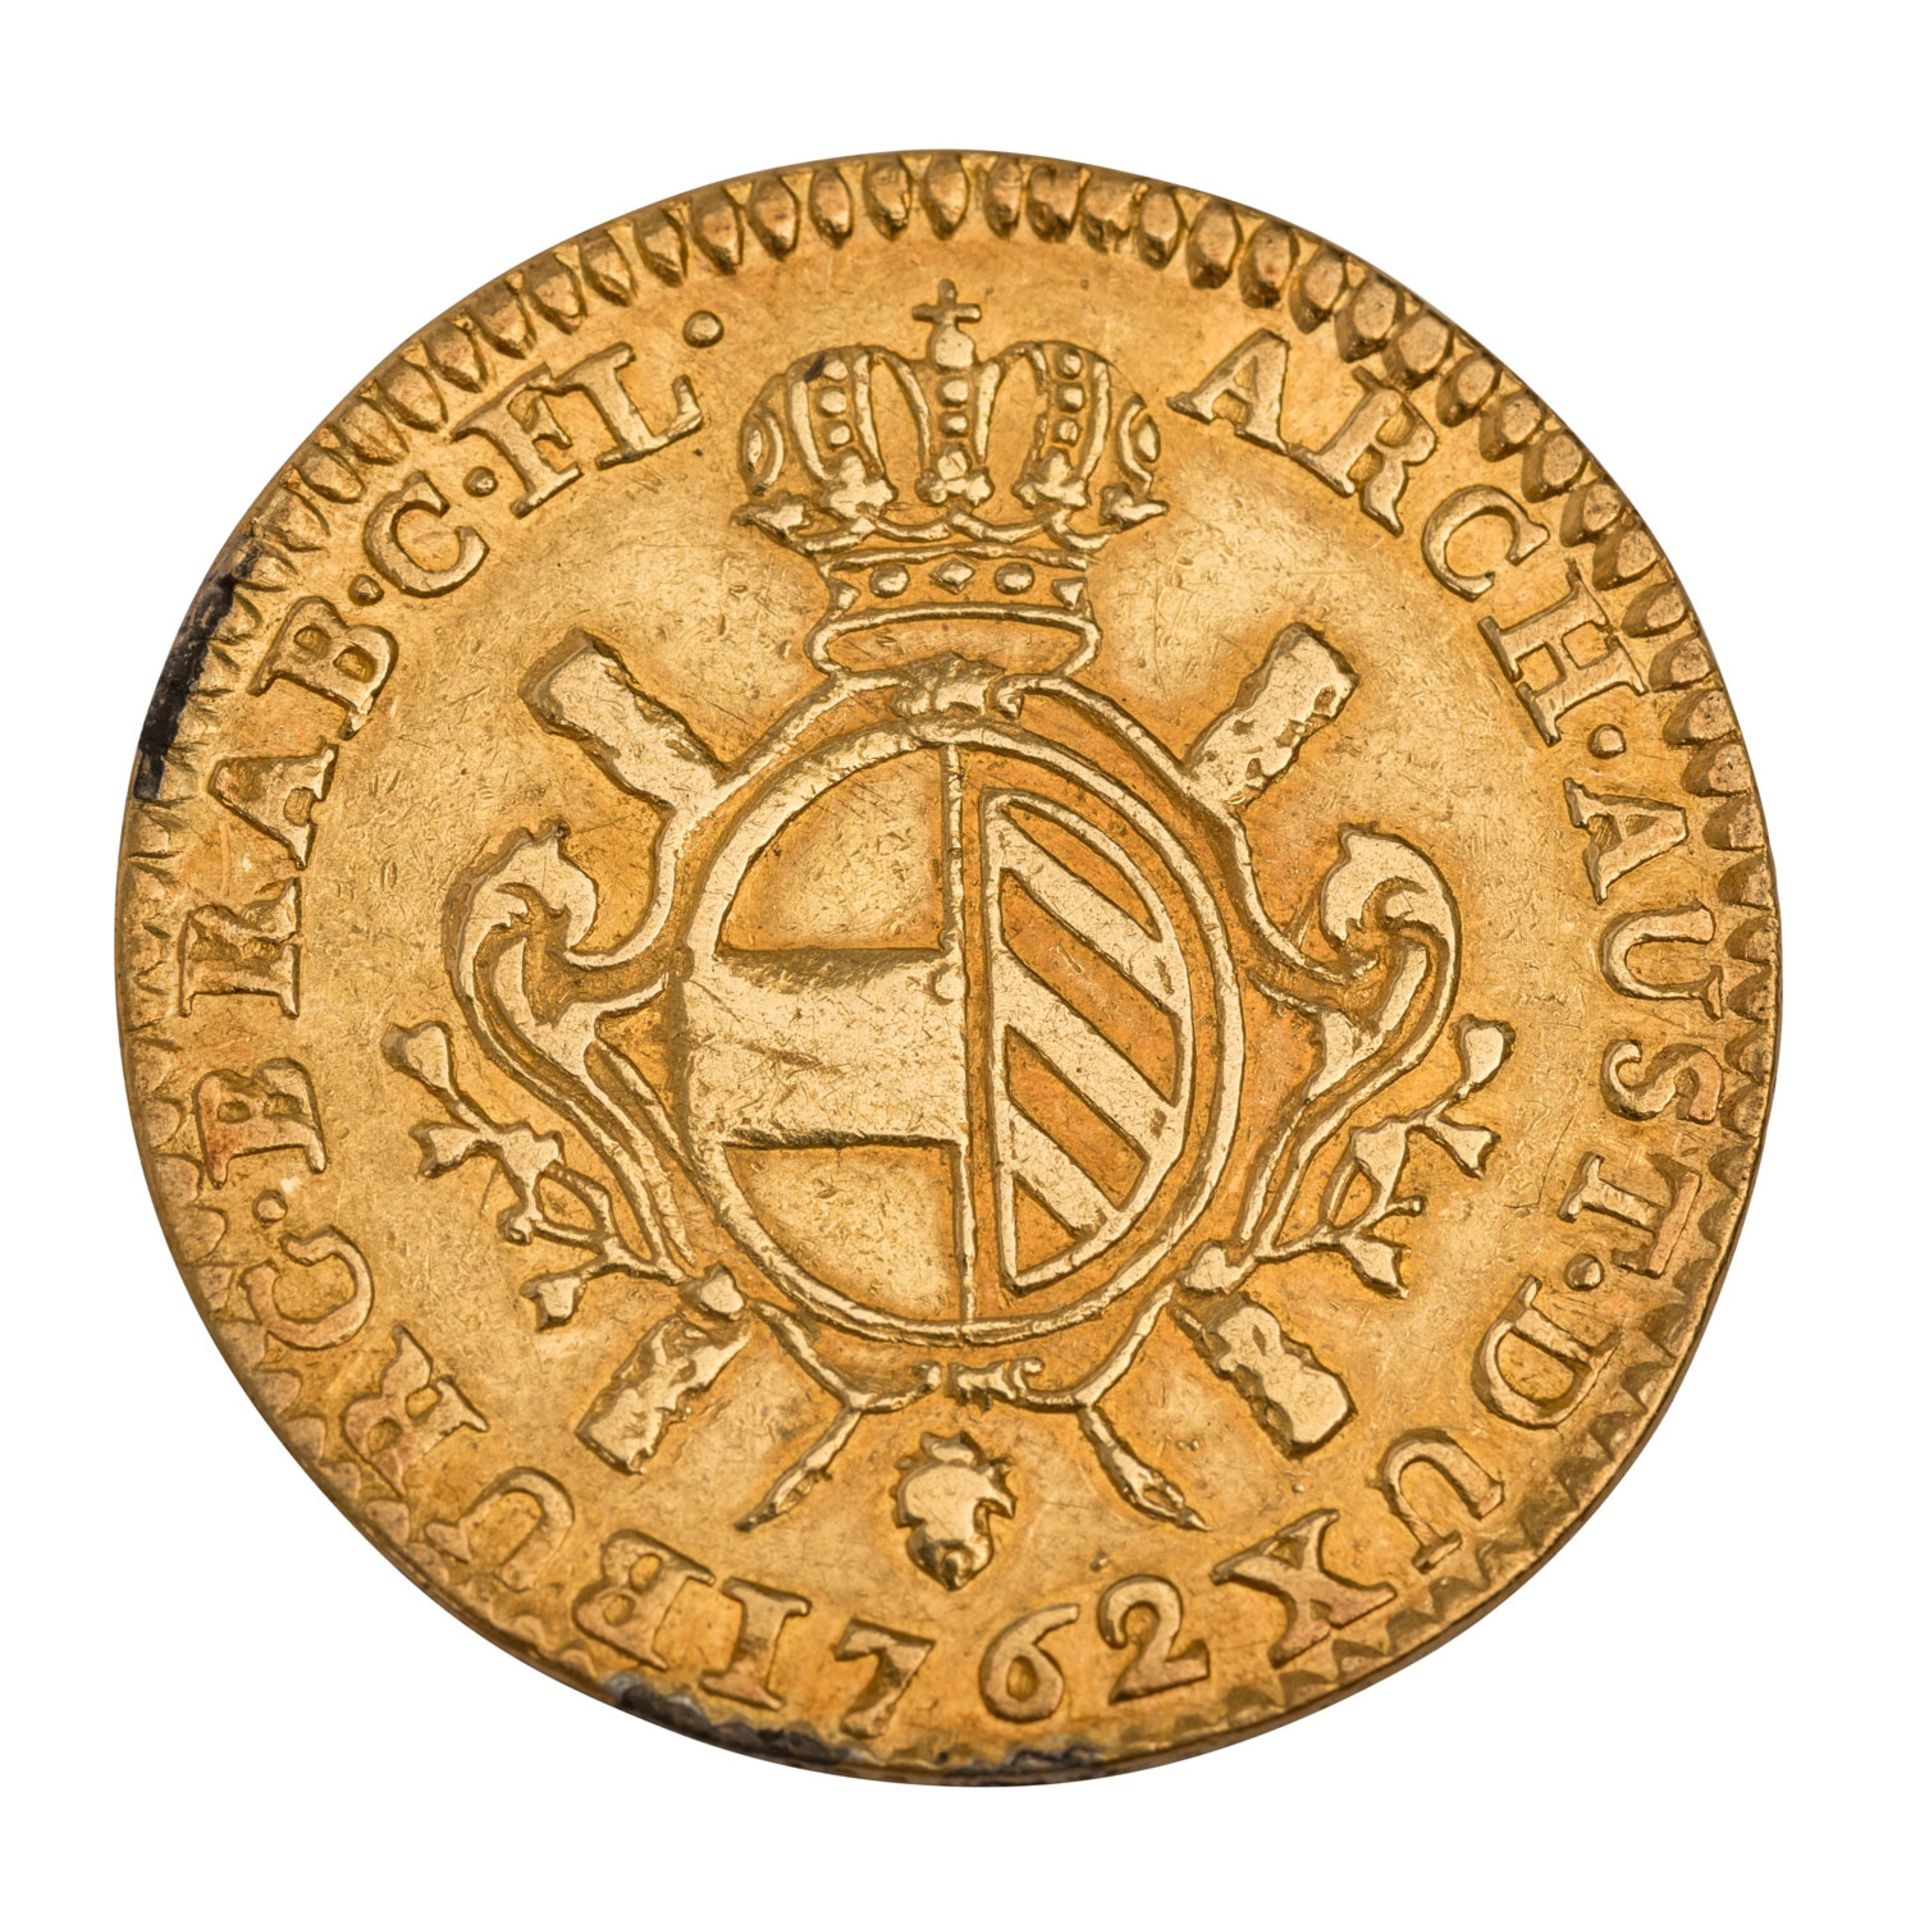 RDR/Gold - 2 Souverain d'or 1762, Maria Theresia, - Image 2 of 2